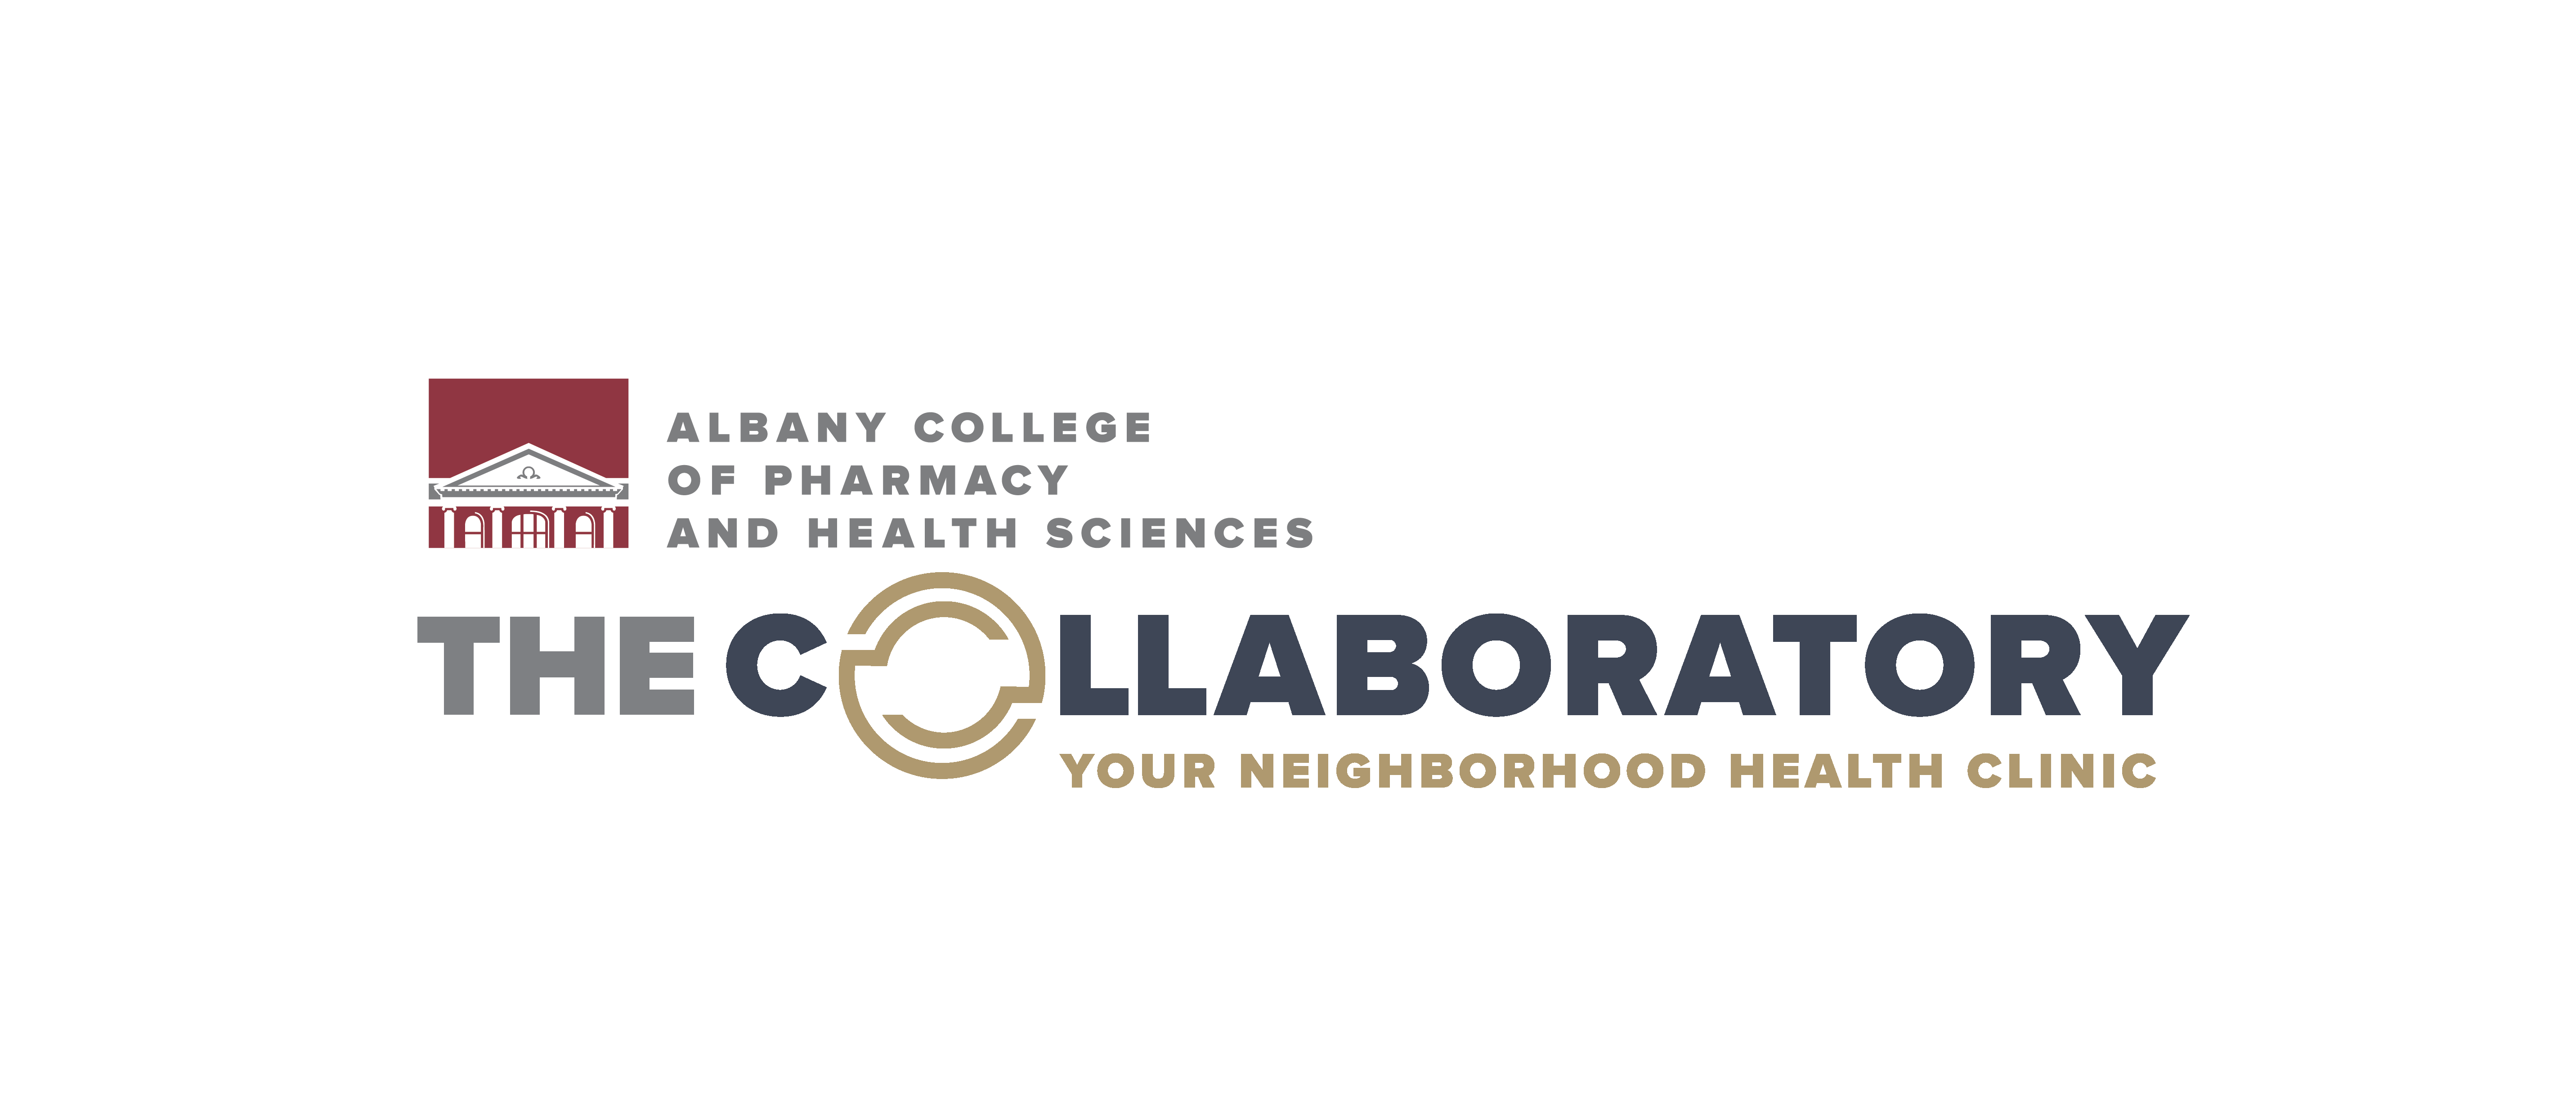 The Collaboratory and ACPHS logo